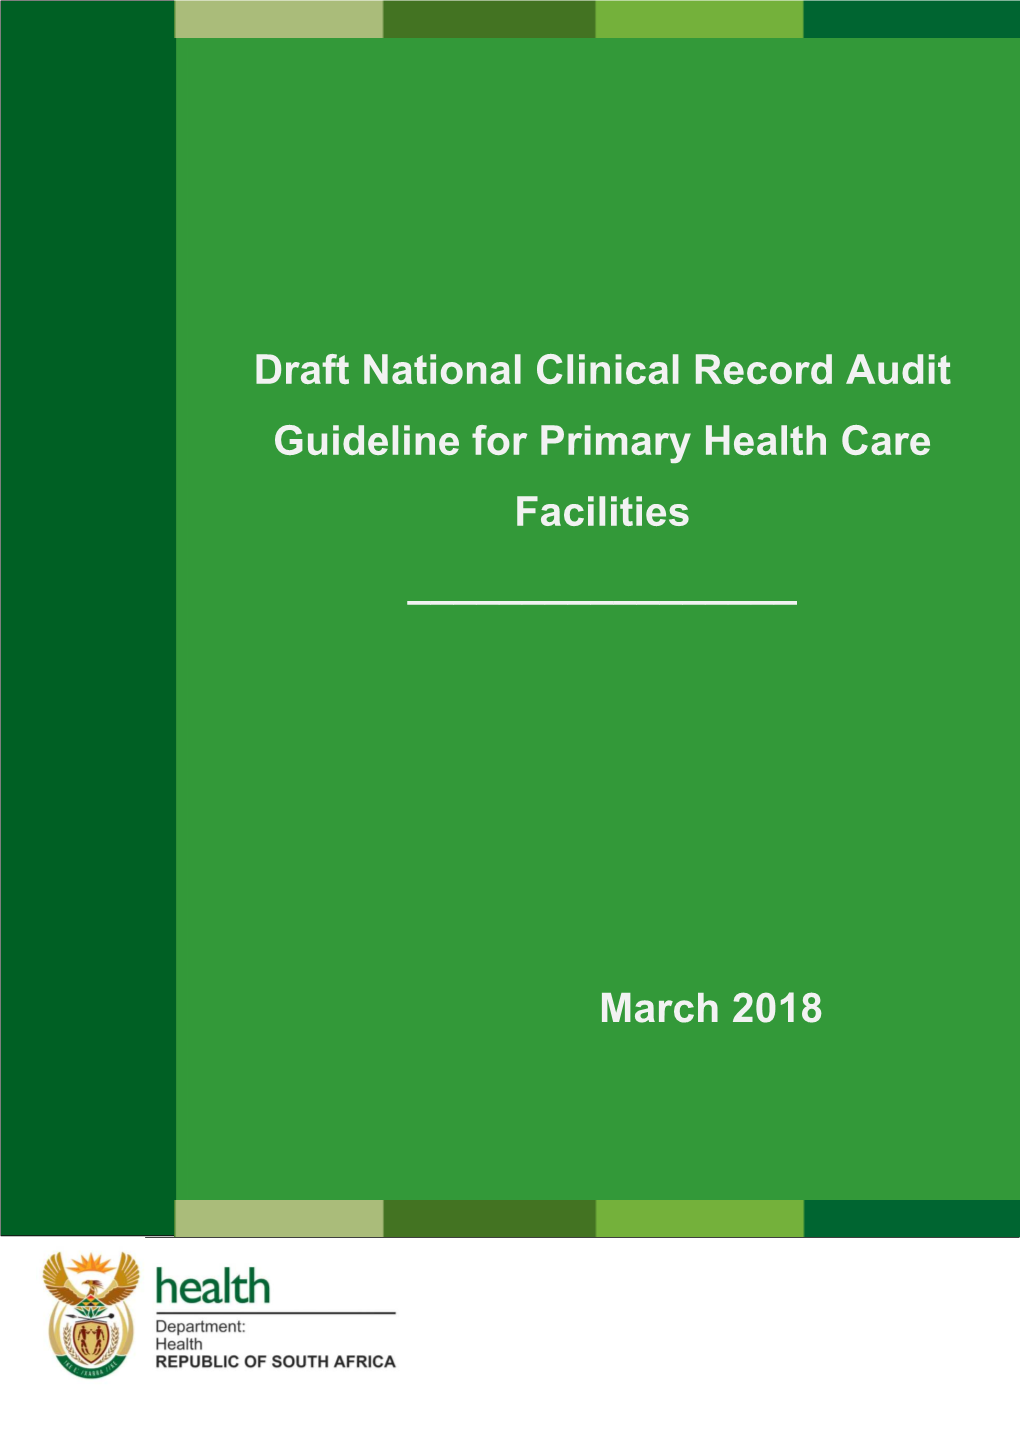 Final Draft National Clinical Record Audit Guideline for PHC Facilities